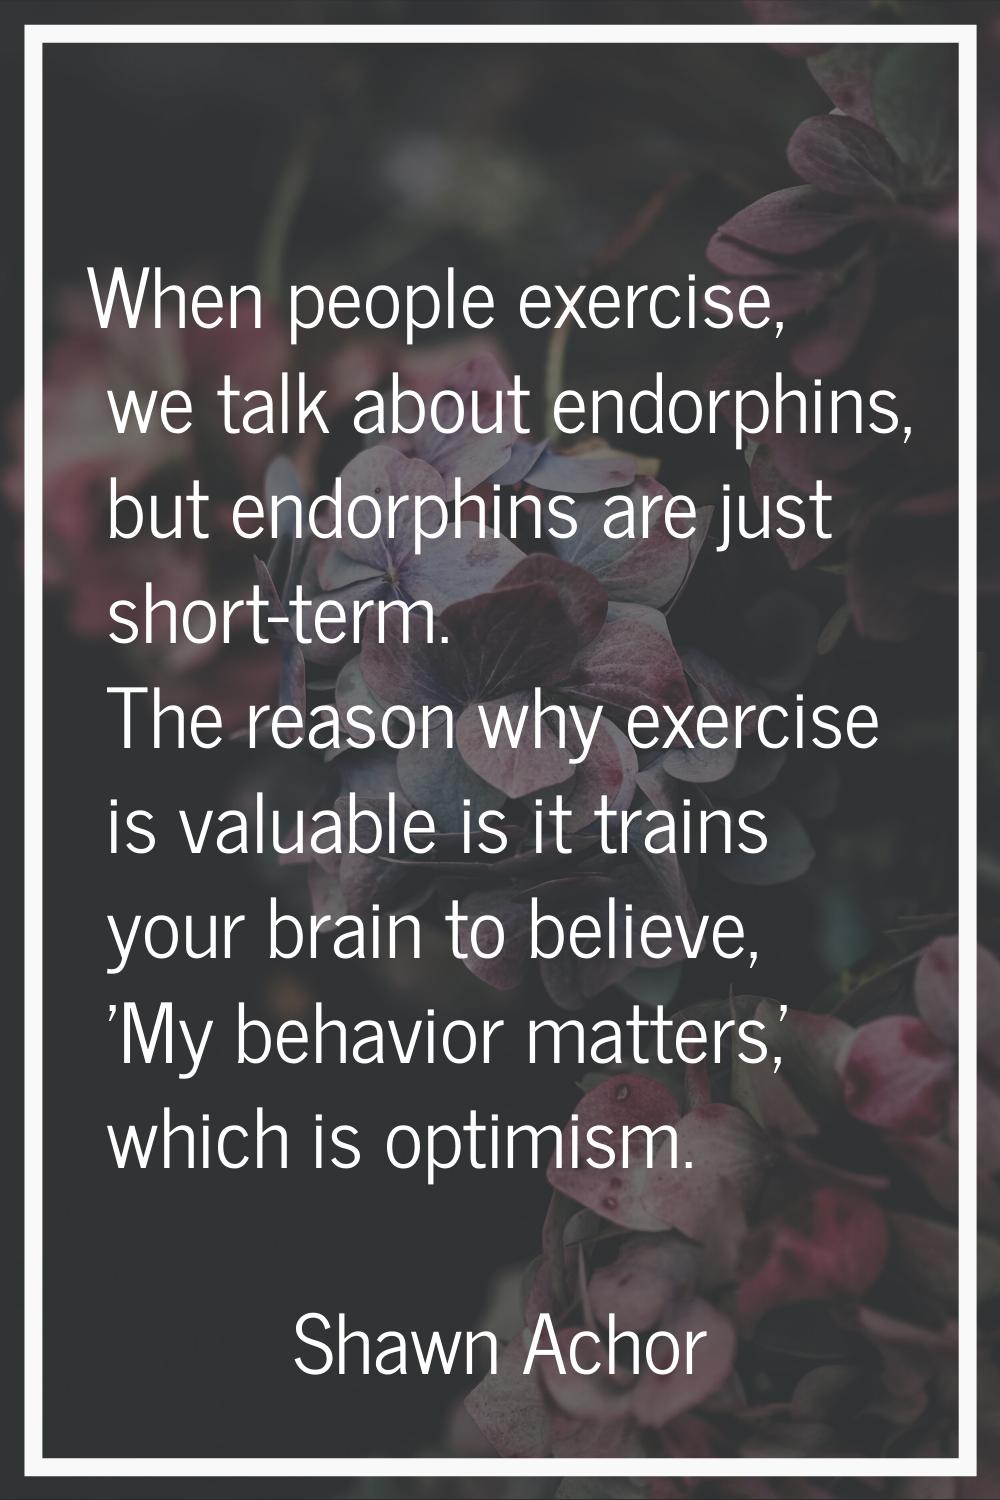 When people exercise, we talk about endorphins, but endorphins are just short-term. The reason why 